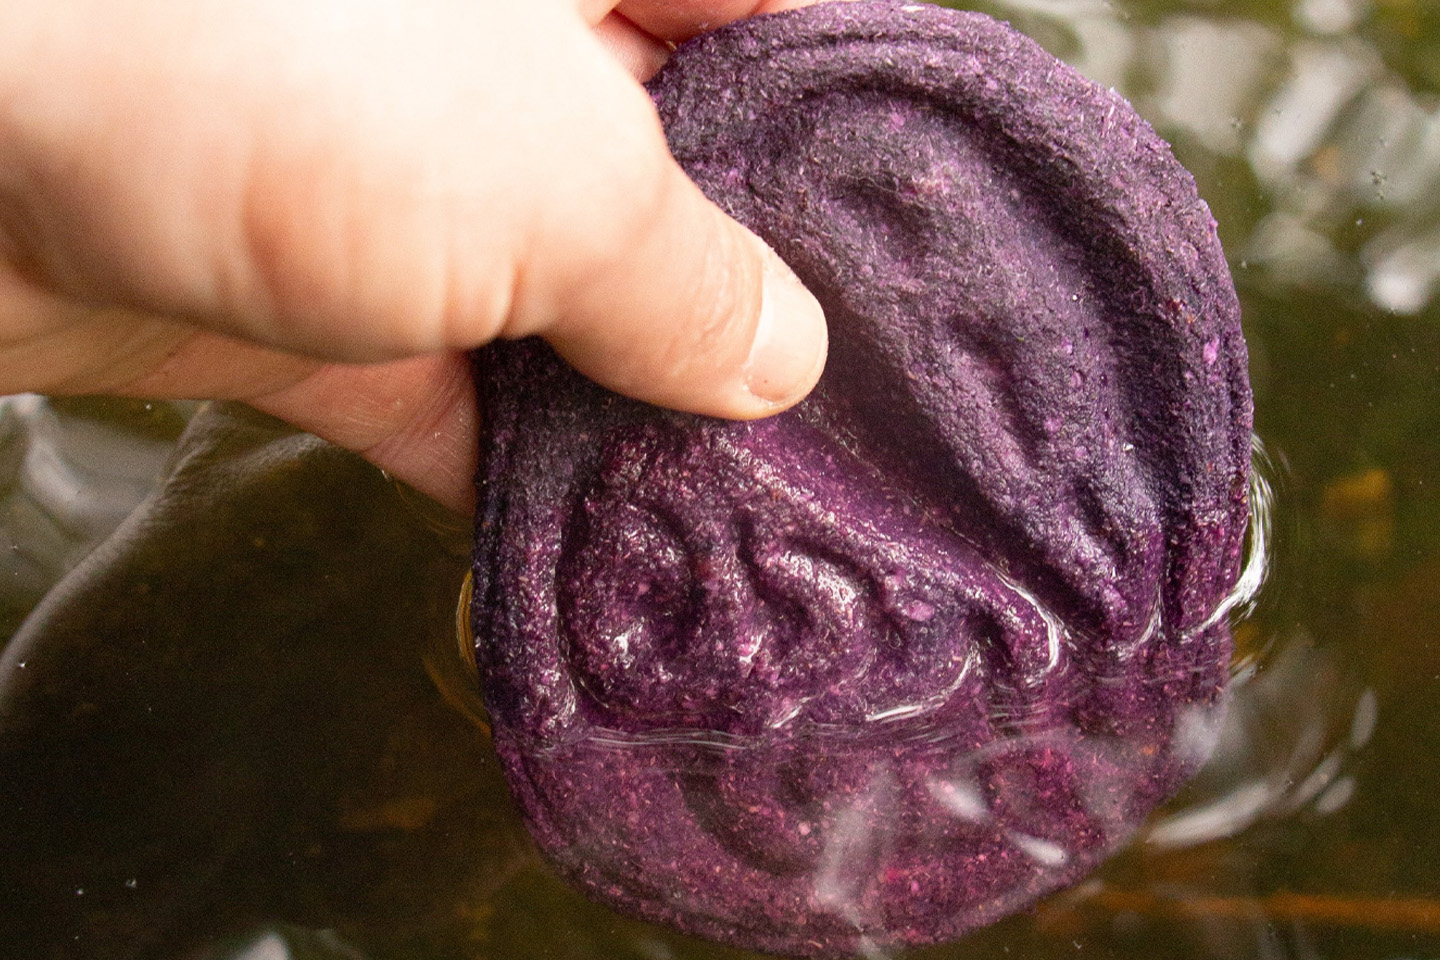 #Clever Bio-Tool Made From Red Cabbage Detects If Your Water Is Contaminated